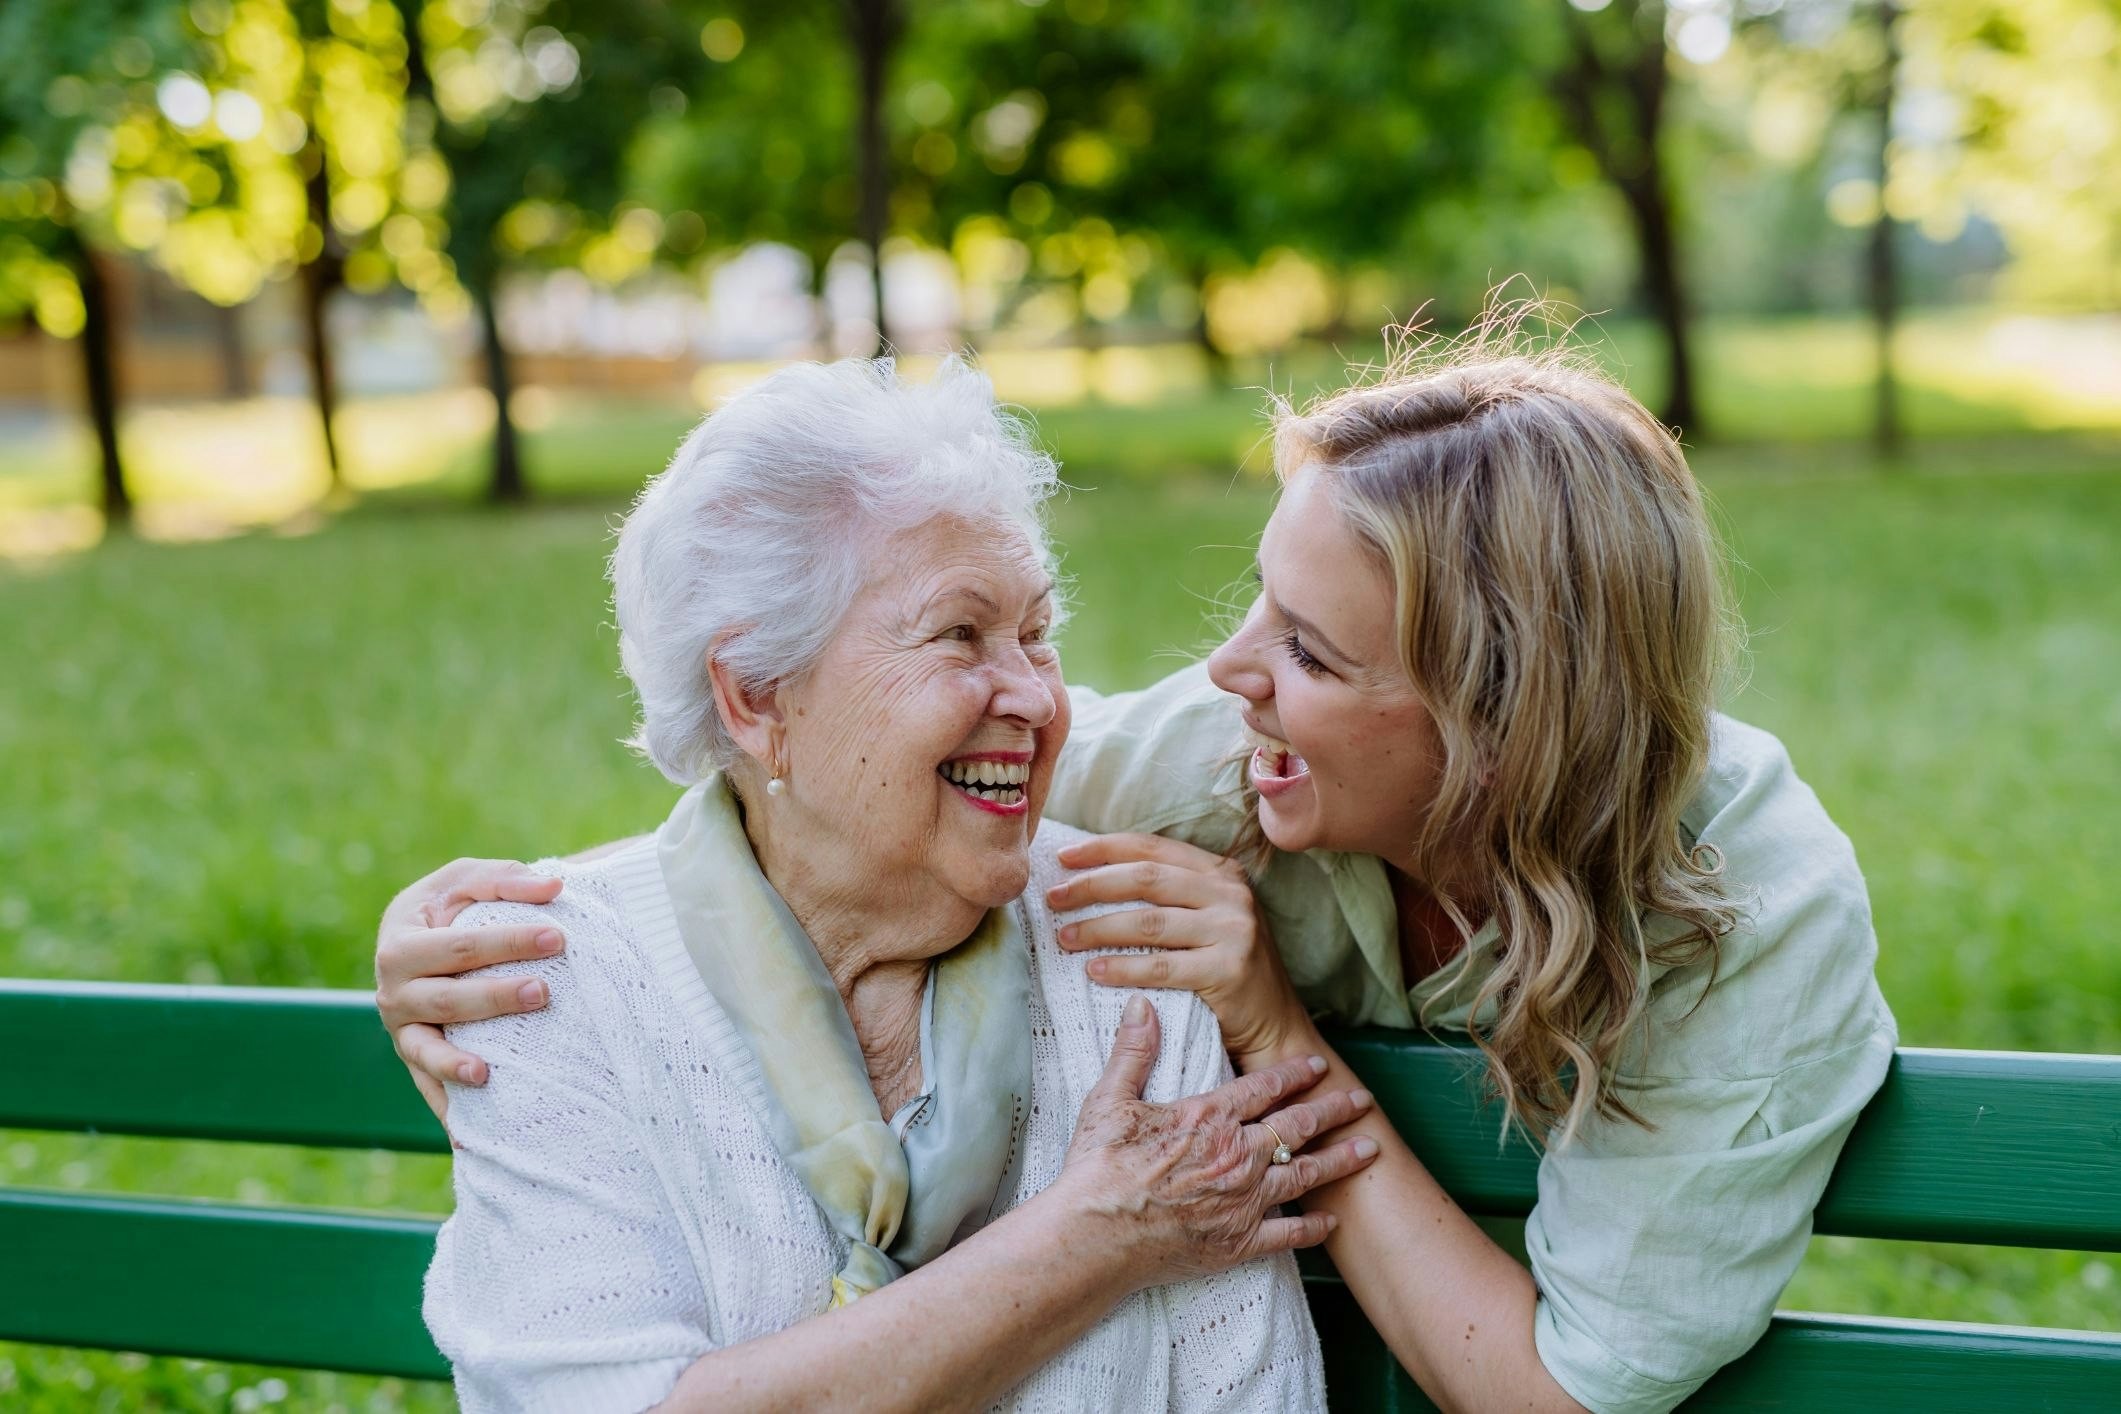 <p>The upcoming Victoria State Budget for 2023 – 2024 is set to be delivered on Tuesday May 23, amidst uncertainty over whether a four-year funding plan for respite care will continue or be cut off. (Source: Shutterstock)</p>
